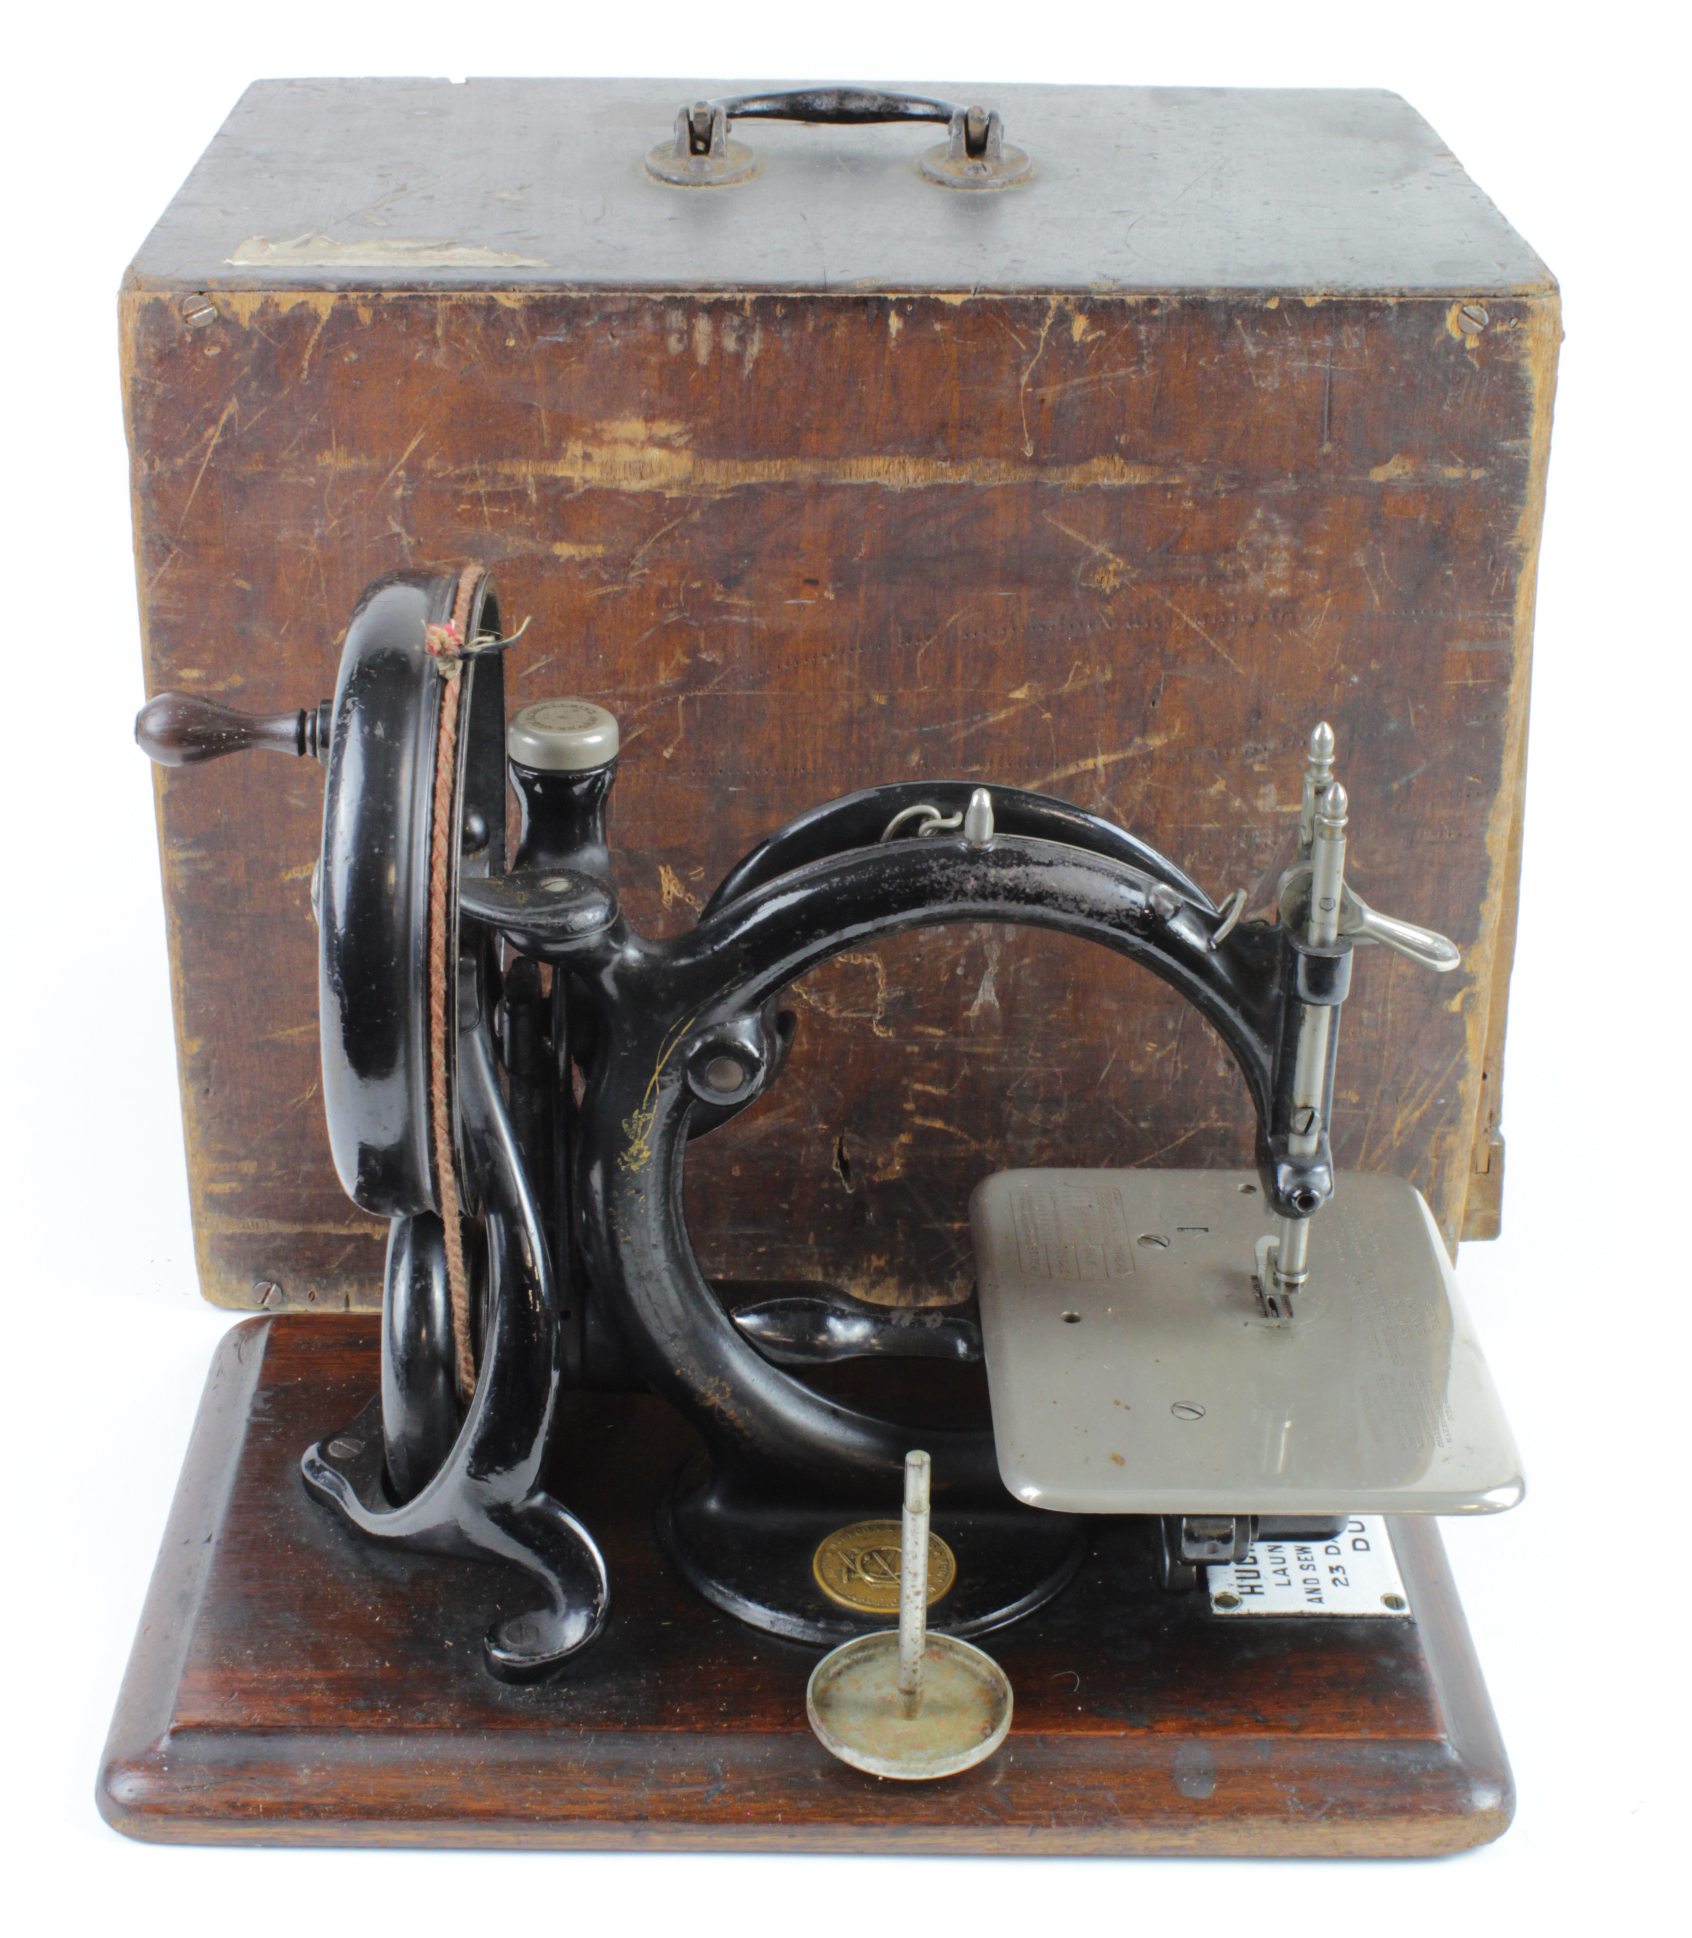 Willcox & Gibbs sewing machine on an oak base, height 25cm, length 33cmcm approx. contained in a